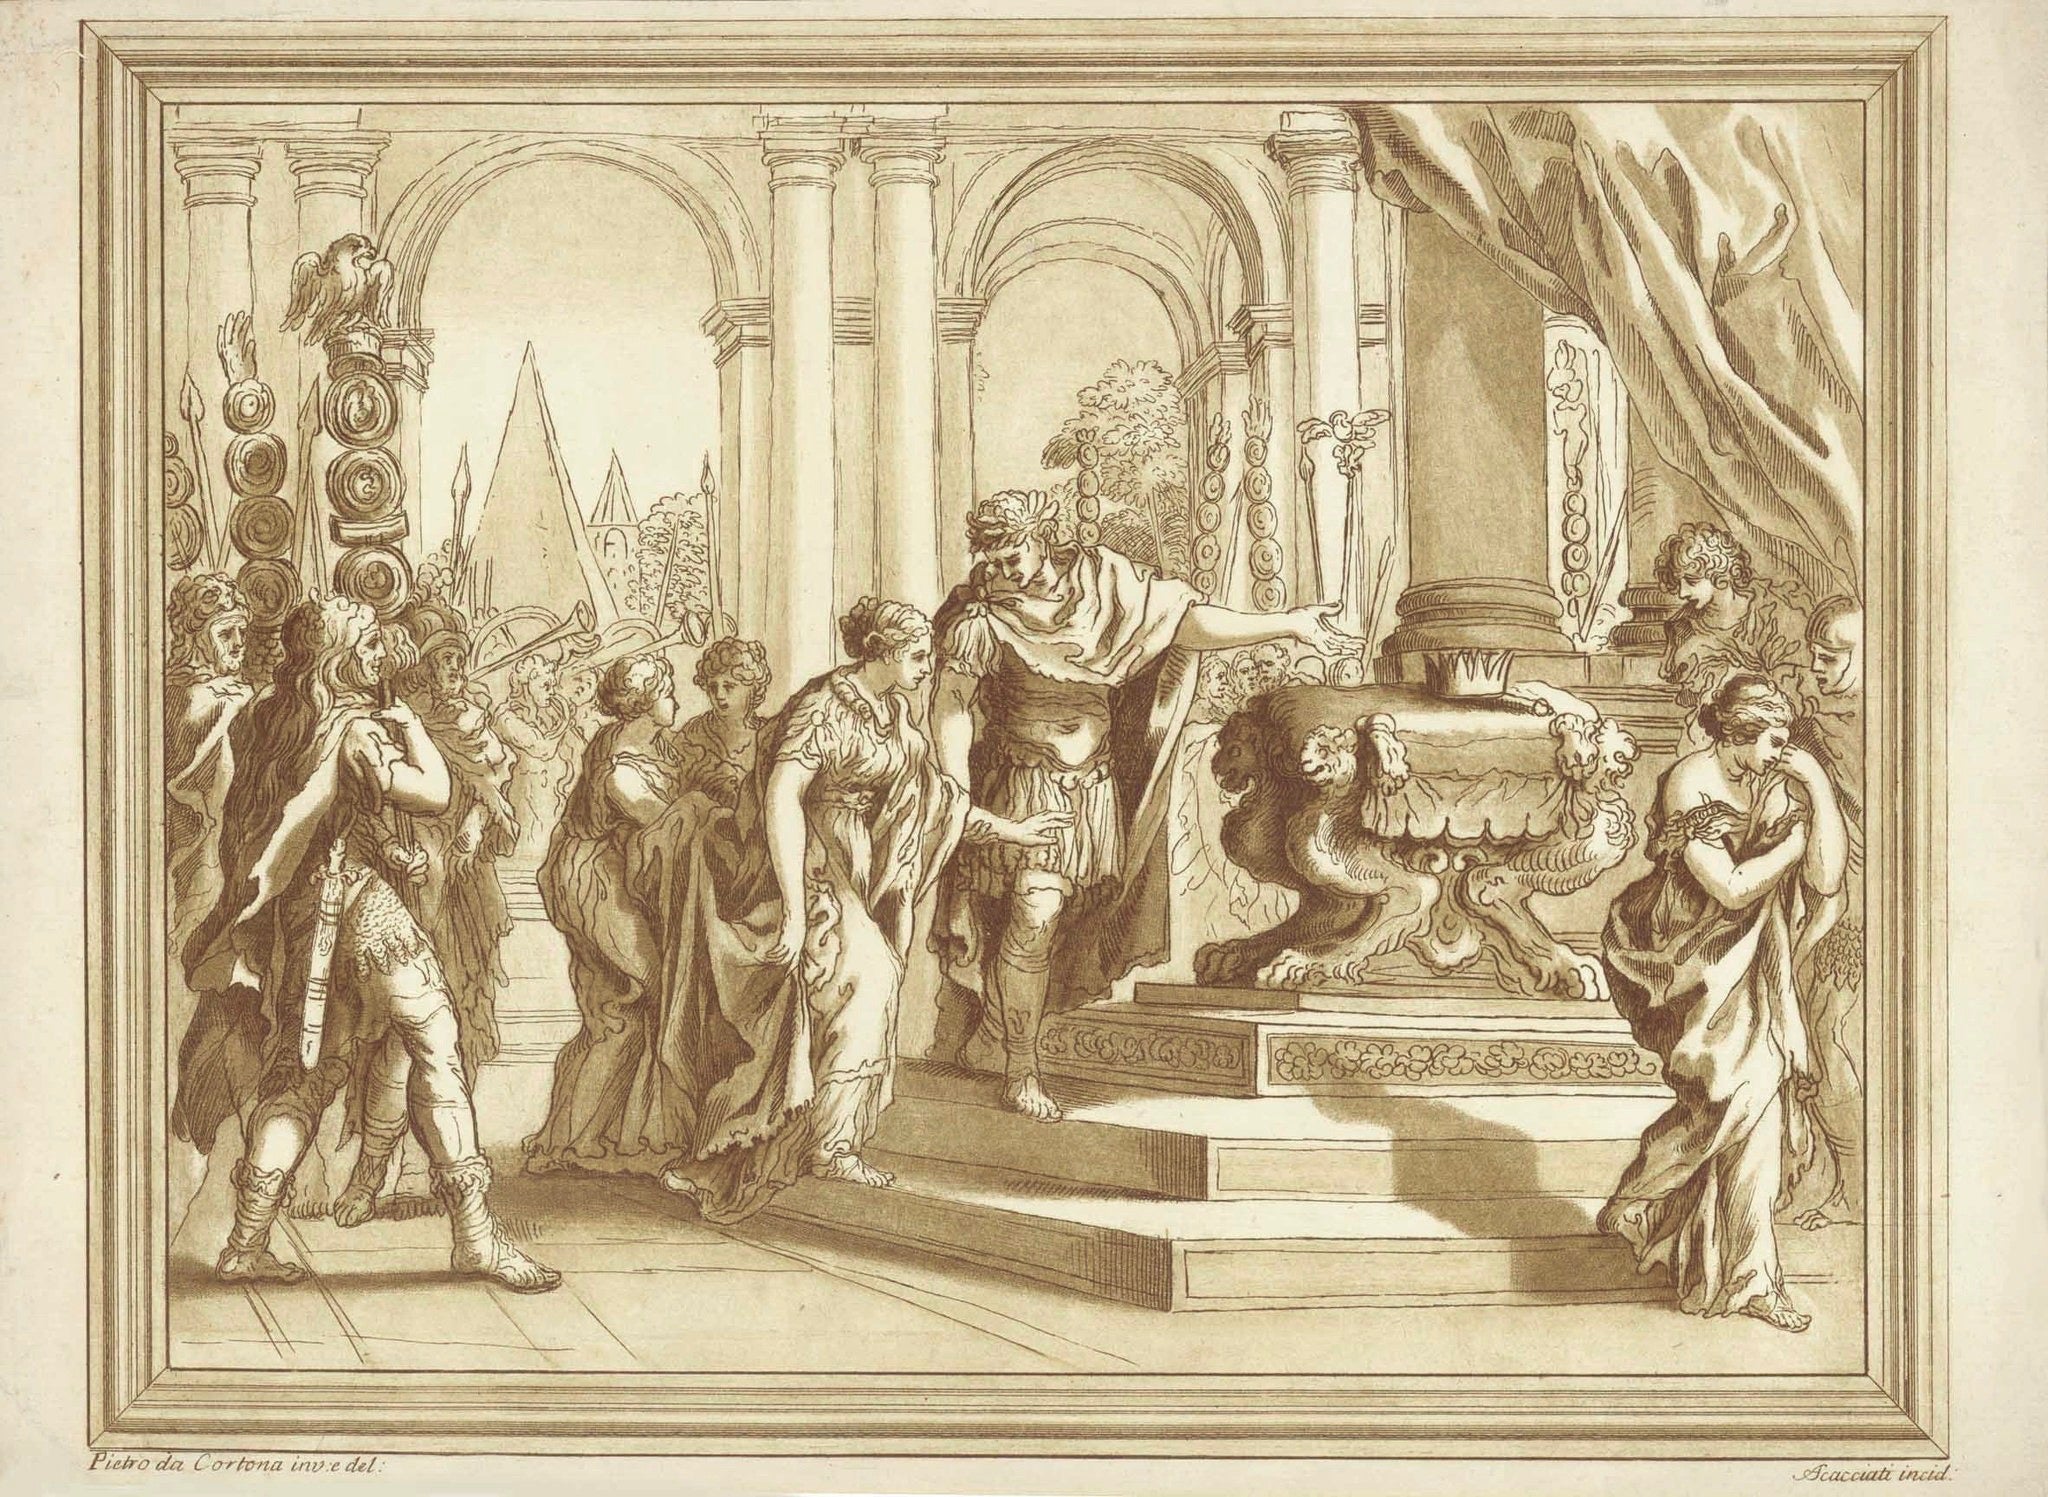 Caesar guiding Cleopatra to the throne of Egypt  Aquatinta etching by Andrea Scacciati (1725-1771)  After the drawing by Pietro da Cortona (Pietro Berrttini da Cortona (1596-1669)  Study work by Pietro da Cortona for a painting he did with this theme.  Roman Emperor Caesar, after defeating Ptolemy XII, fell in love with beautiful Cleopatra. He led her to the Egyptian throne while she was in dispute with her brother Ptolemy. We see her here ascending the steps to the throne, ushered there by Caesar.